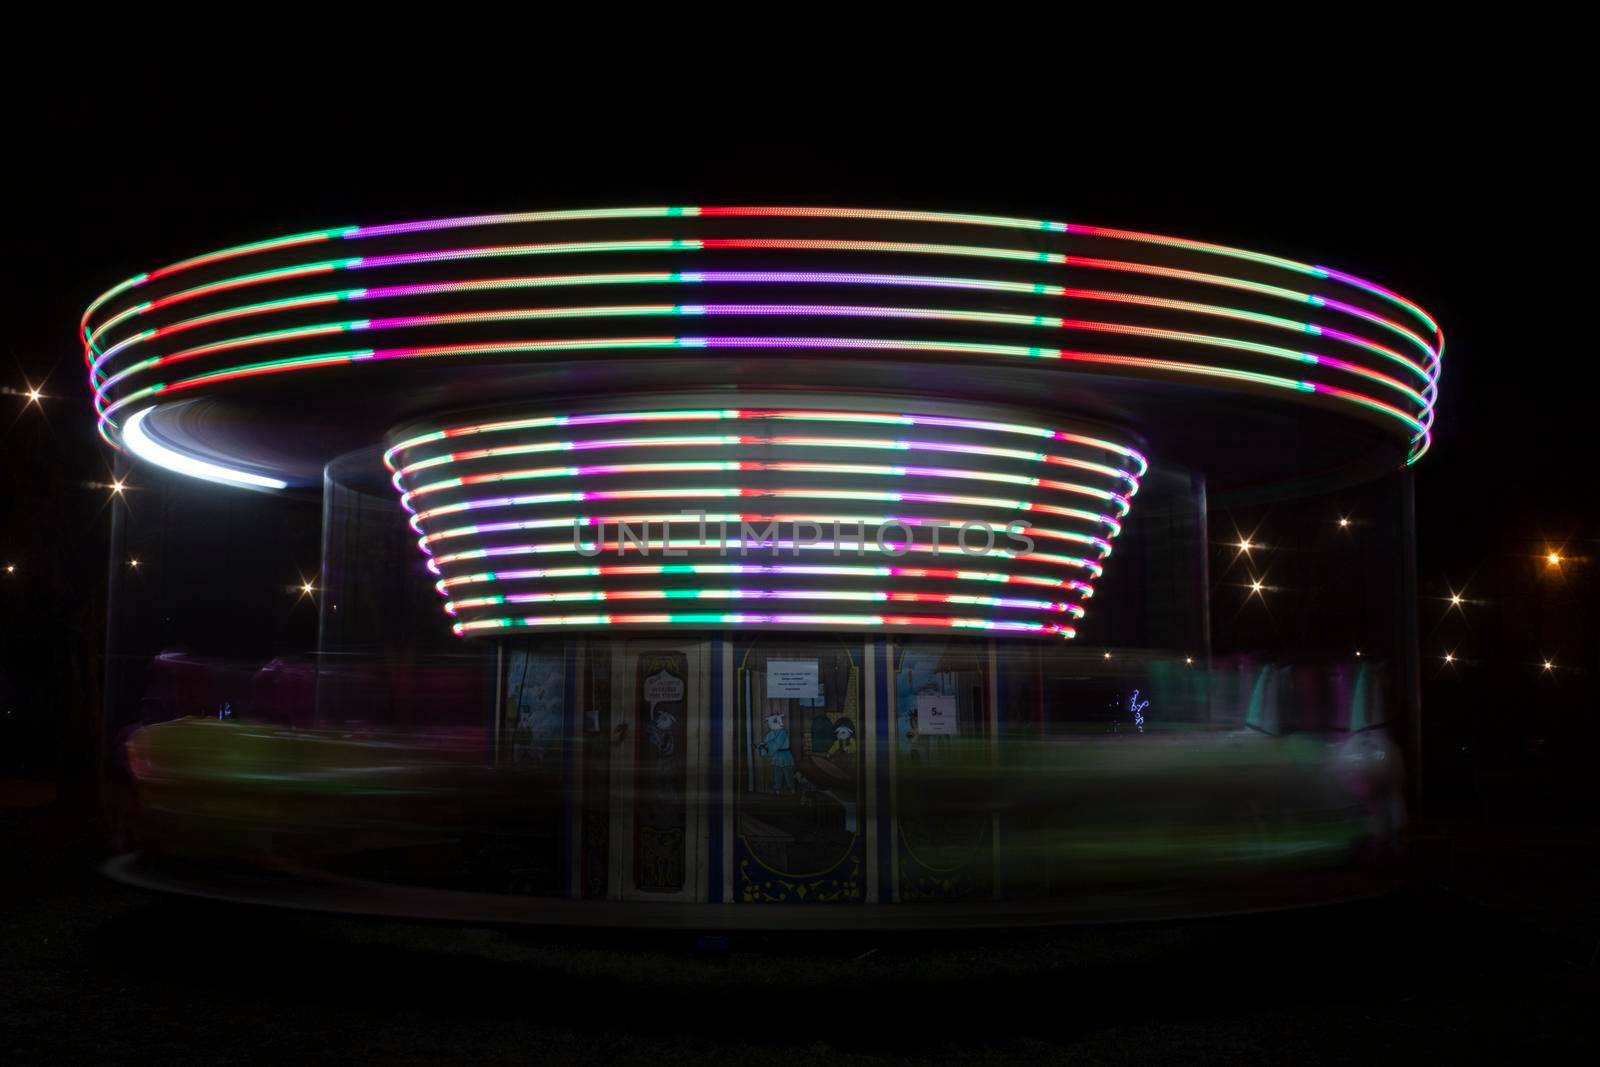 A colorful carousel spinning with a long exposure time by bybyphotography